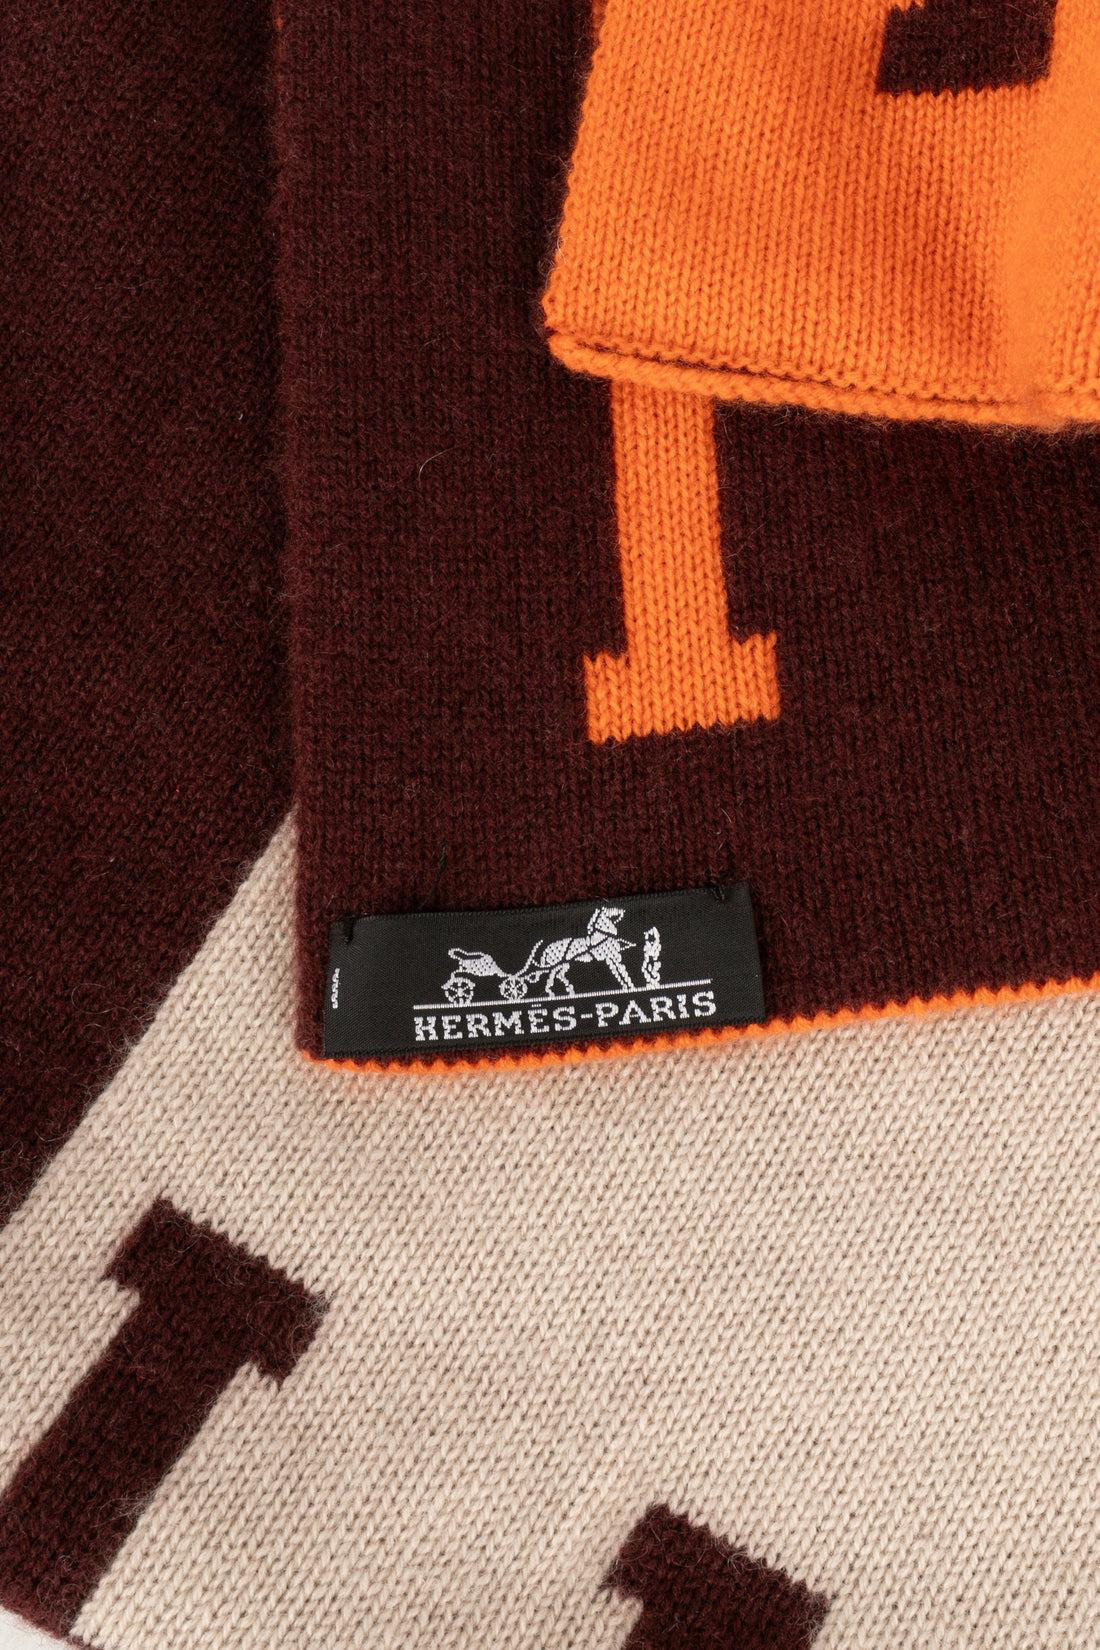 Hermès Cashmere and Wool Plaid/Blanket For Sale 1